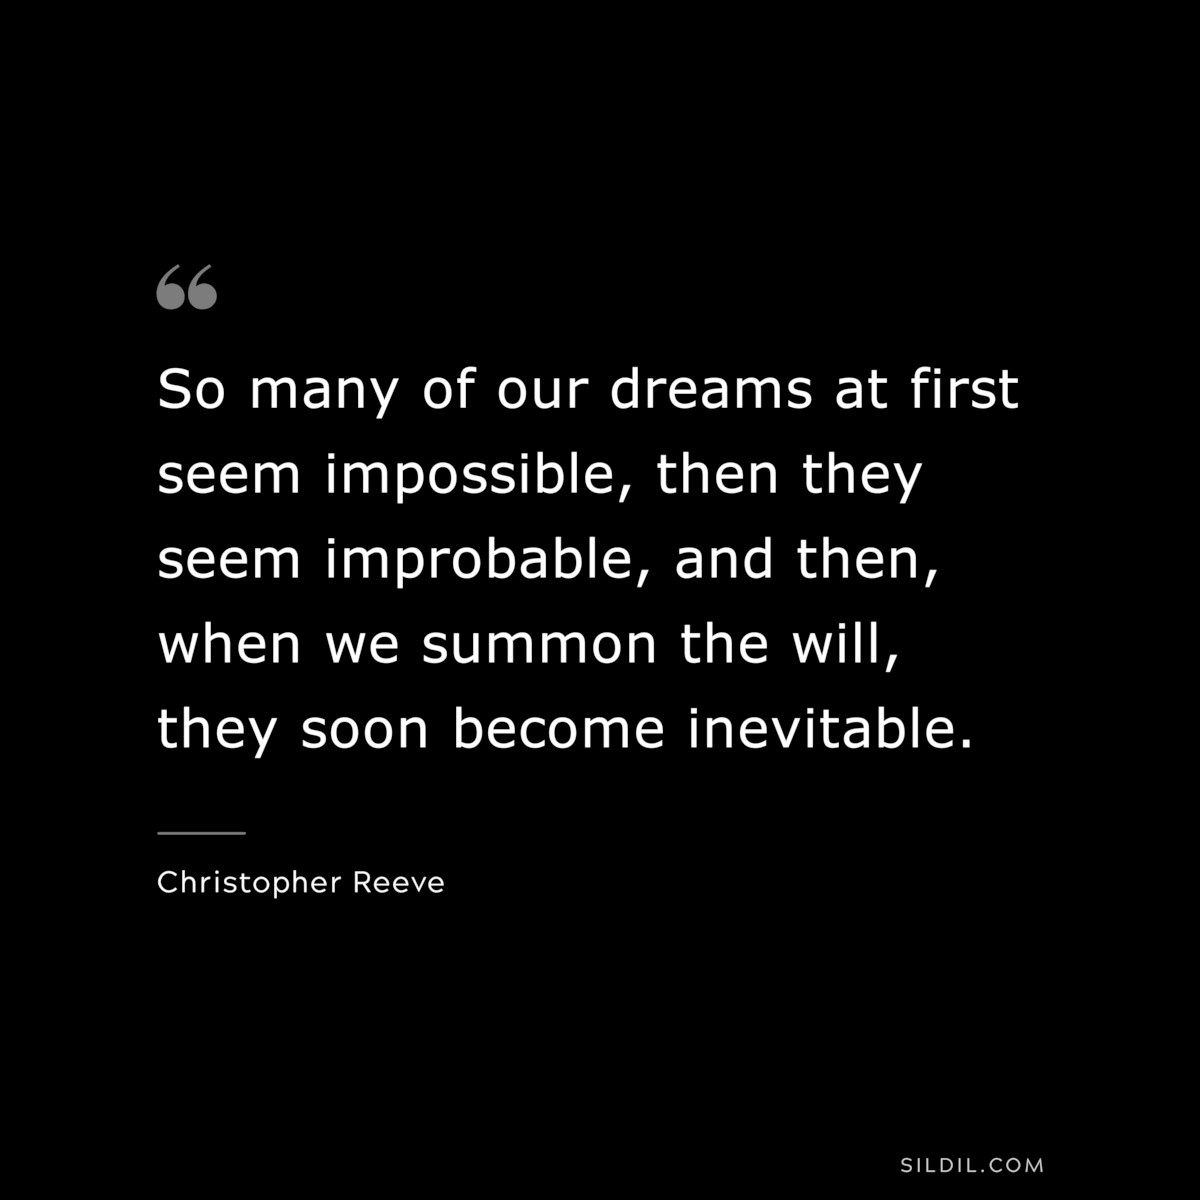 So many of our dreams at first seem impossible, then they seem improbable, and then, when we summon the will, they soon become inevitable. ― Christopher Reeve